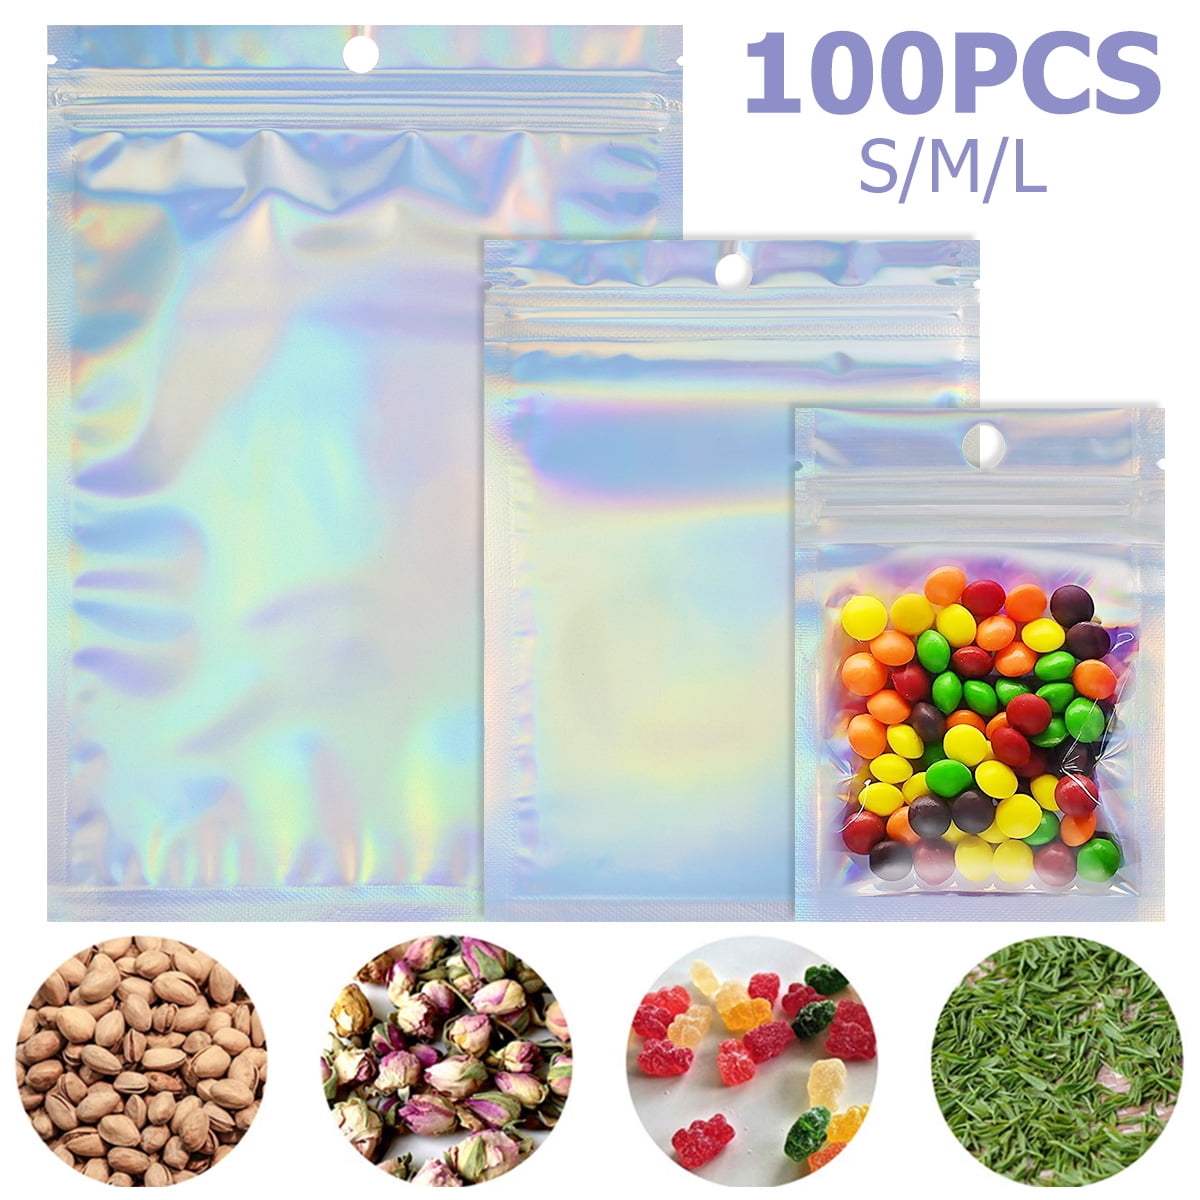 Inner Size 1.6x1.8″ 100PCS Resealable Smell Proof Bags Foil Pouch Baggies,Holographic Mylar Ziplock Clear Bag Packaging for Jewelry,Lip Gloss,Candy,Food Storage,Products,Eyelash Malastar 2x3 inch 